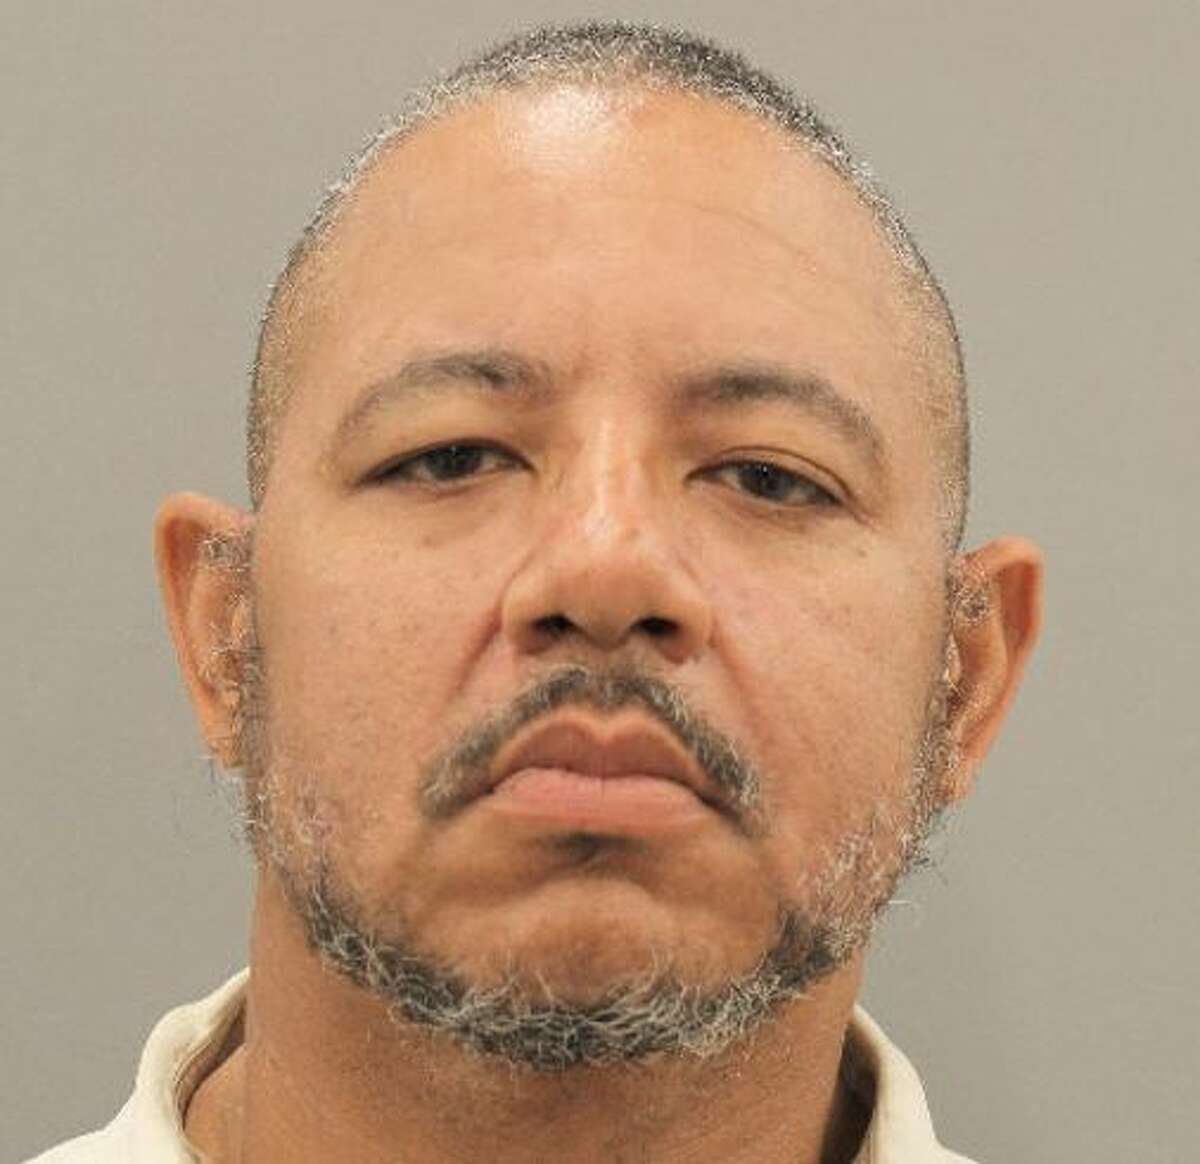 Police Houston man killed, dismembered wife days after detectives interviewed him about sex abuse claim hq nude pic